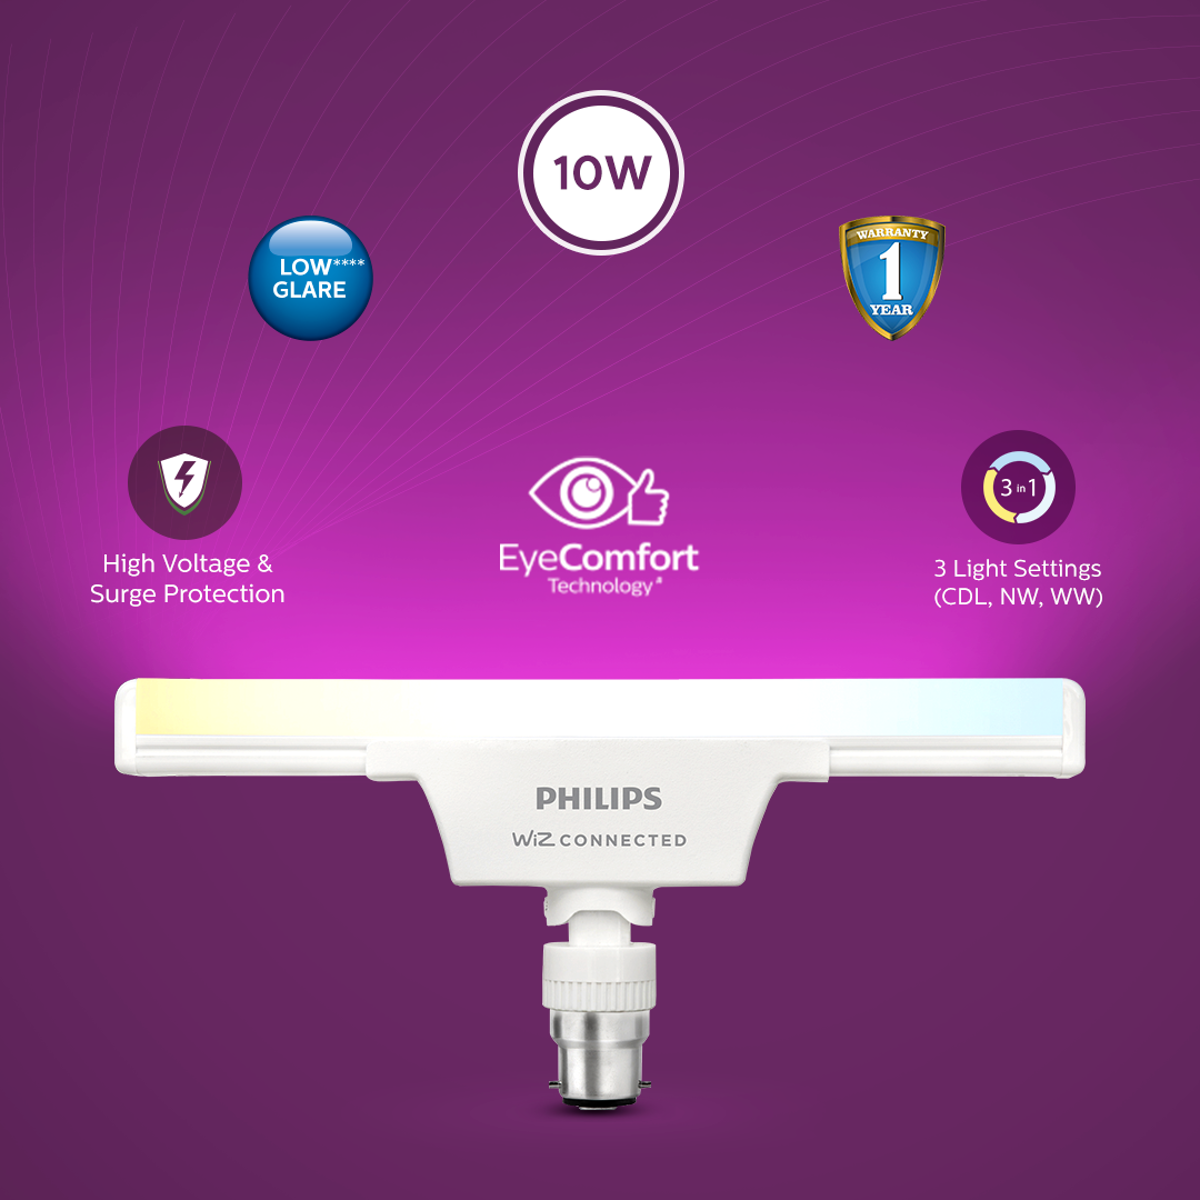 Philips Smart WiFi LED T-Bulb (Wiz Connected)